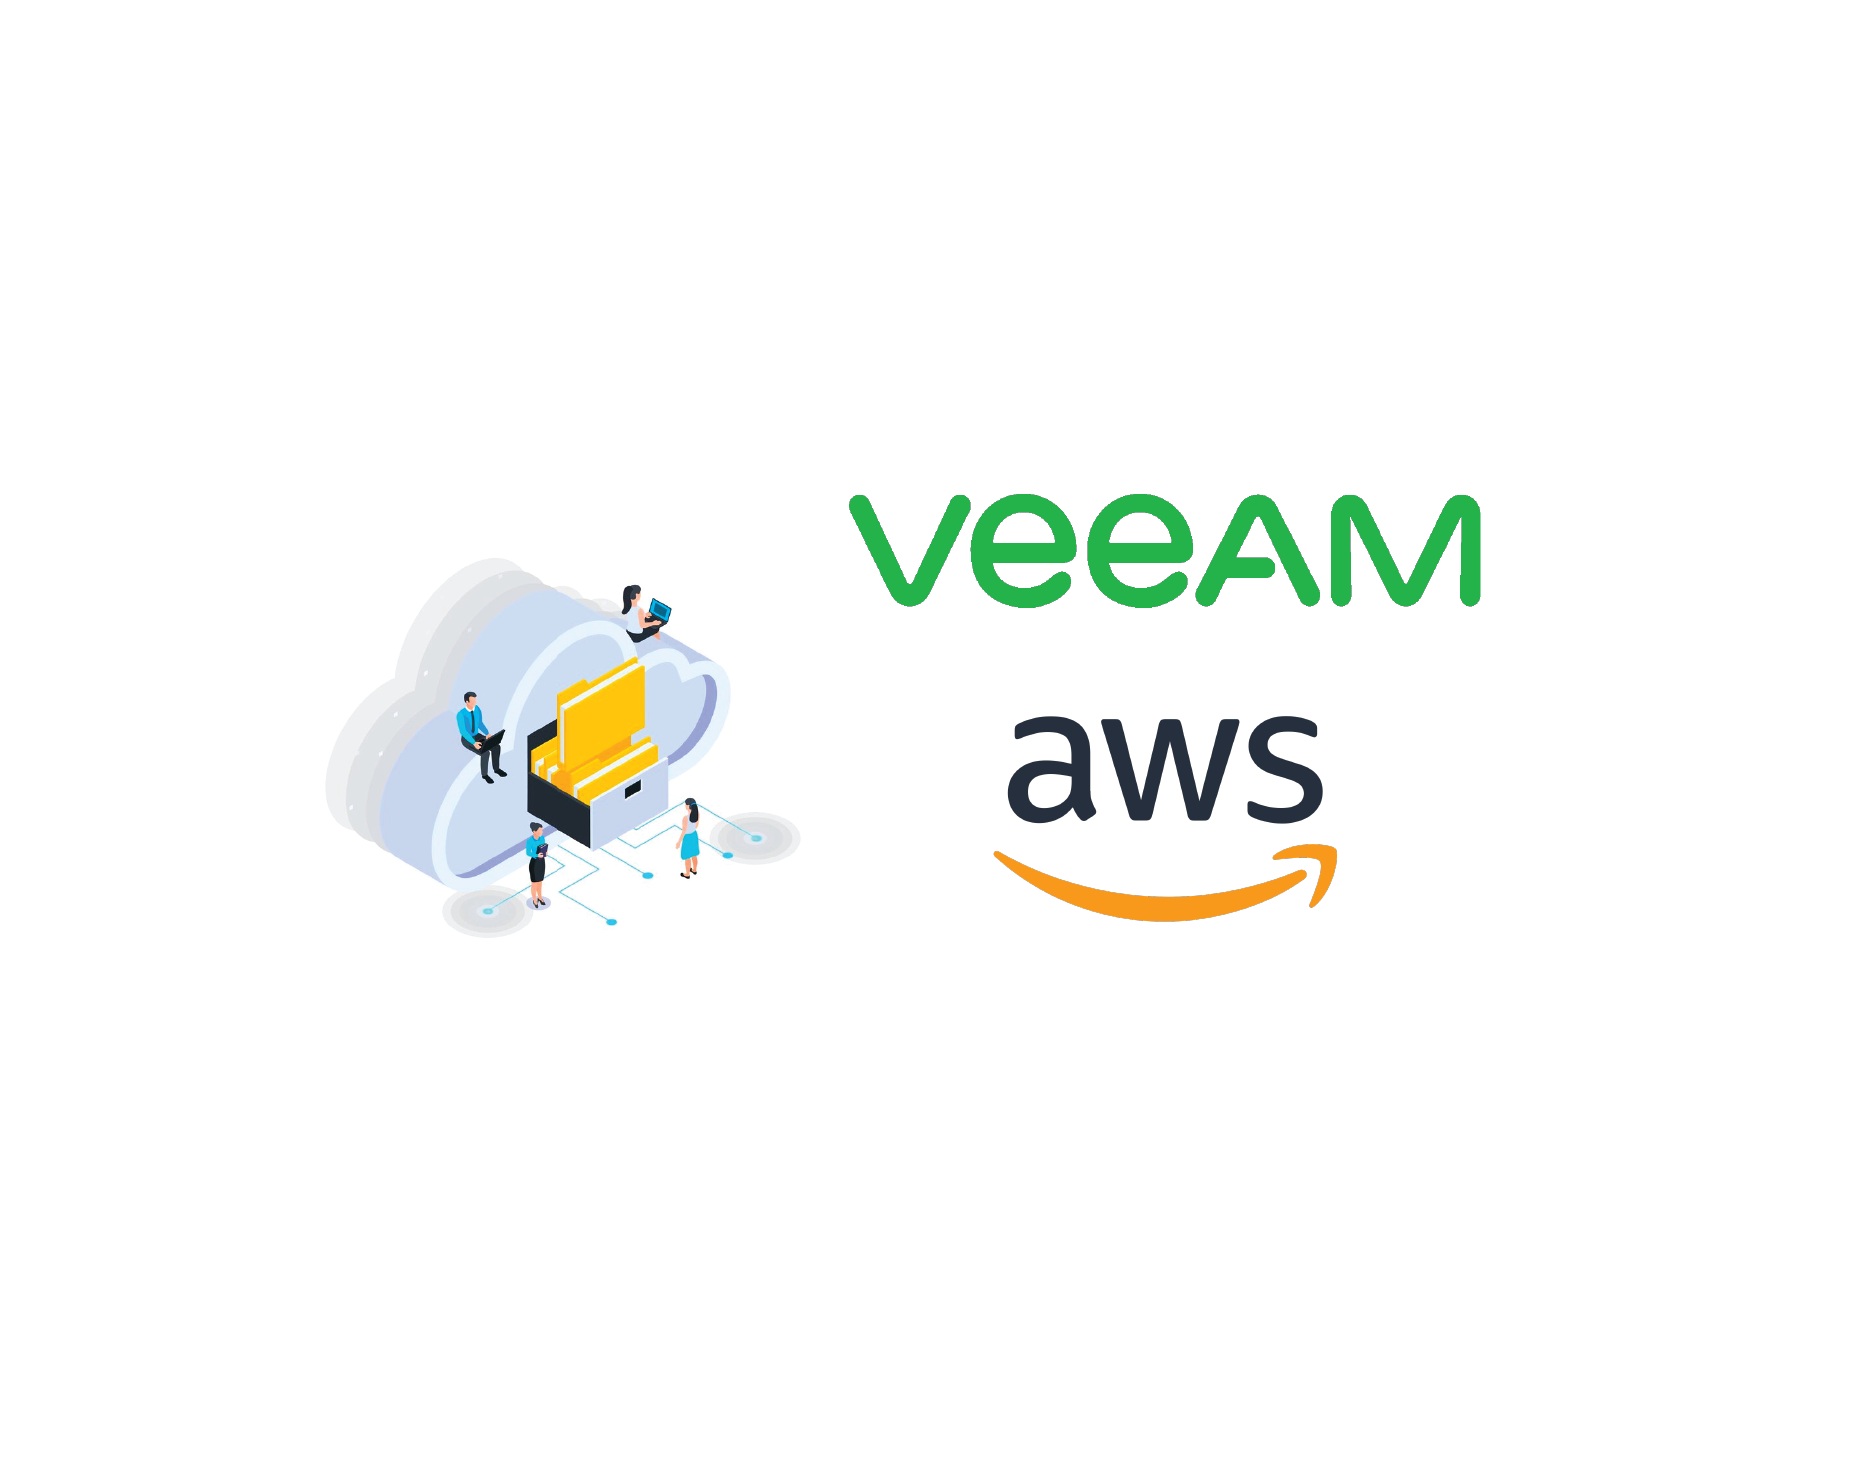 Veeam and AWS Work Together to Help Partners Accelerate Cloud Migration in Asia Pacific and Japan